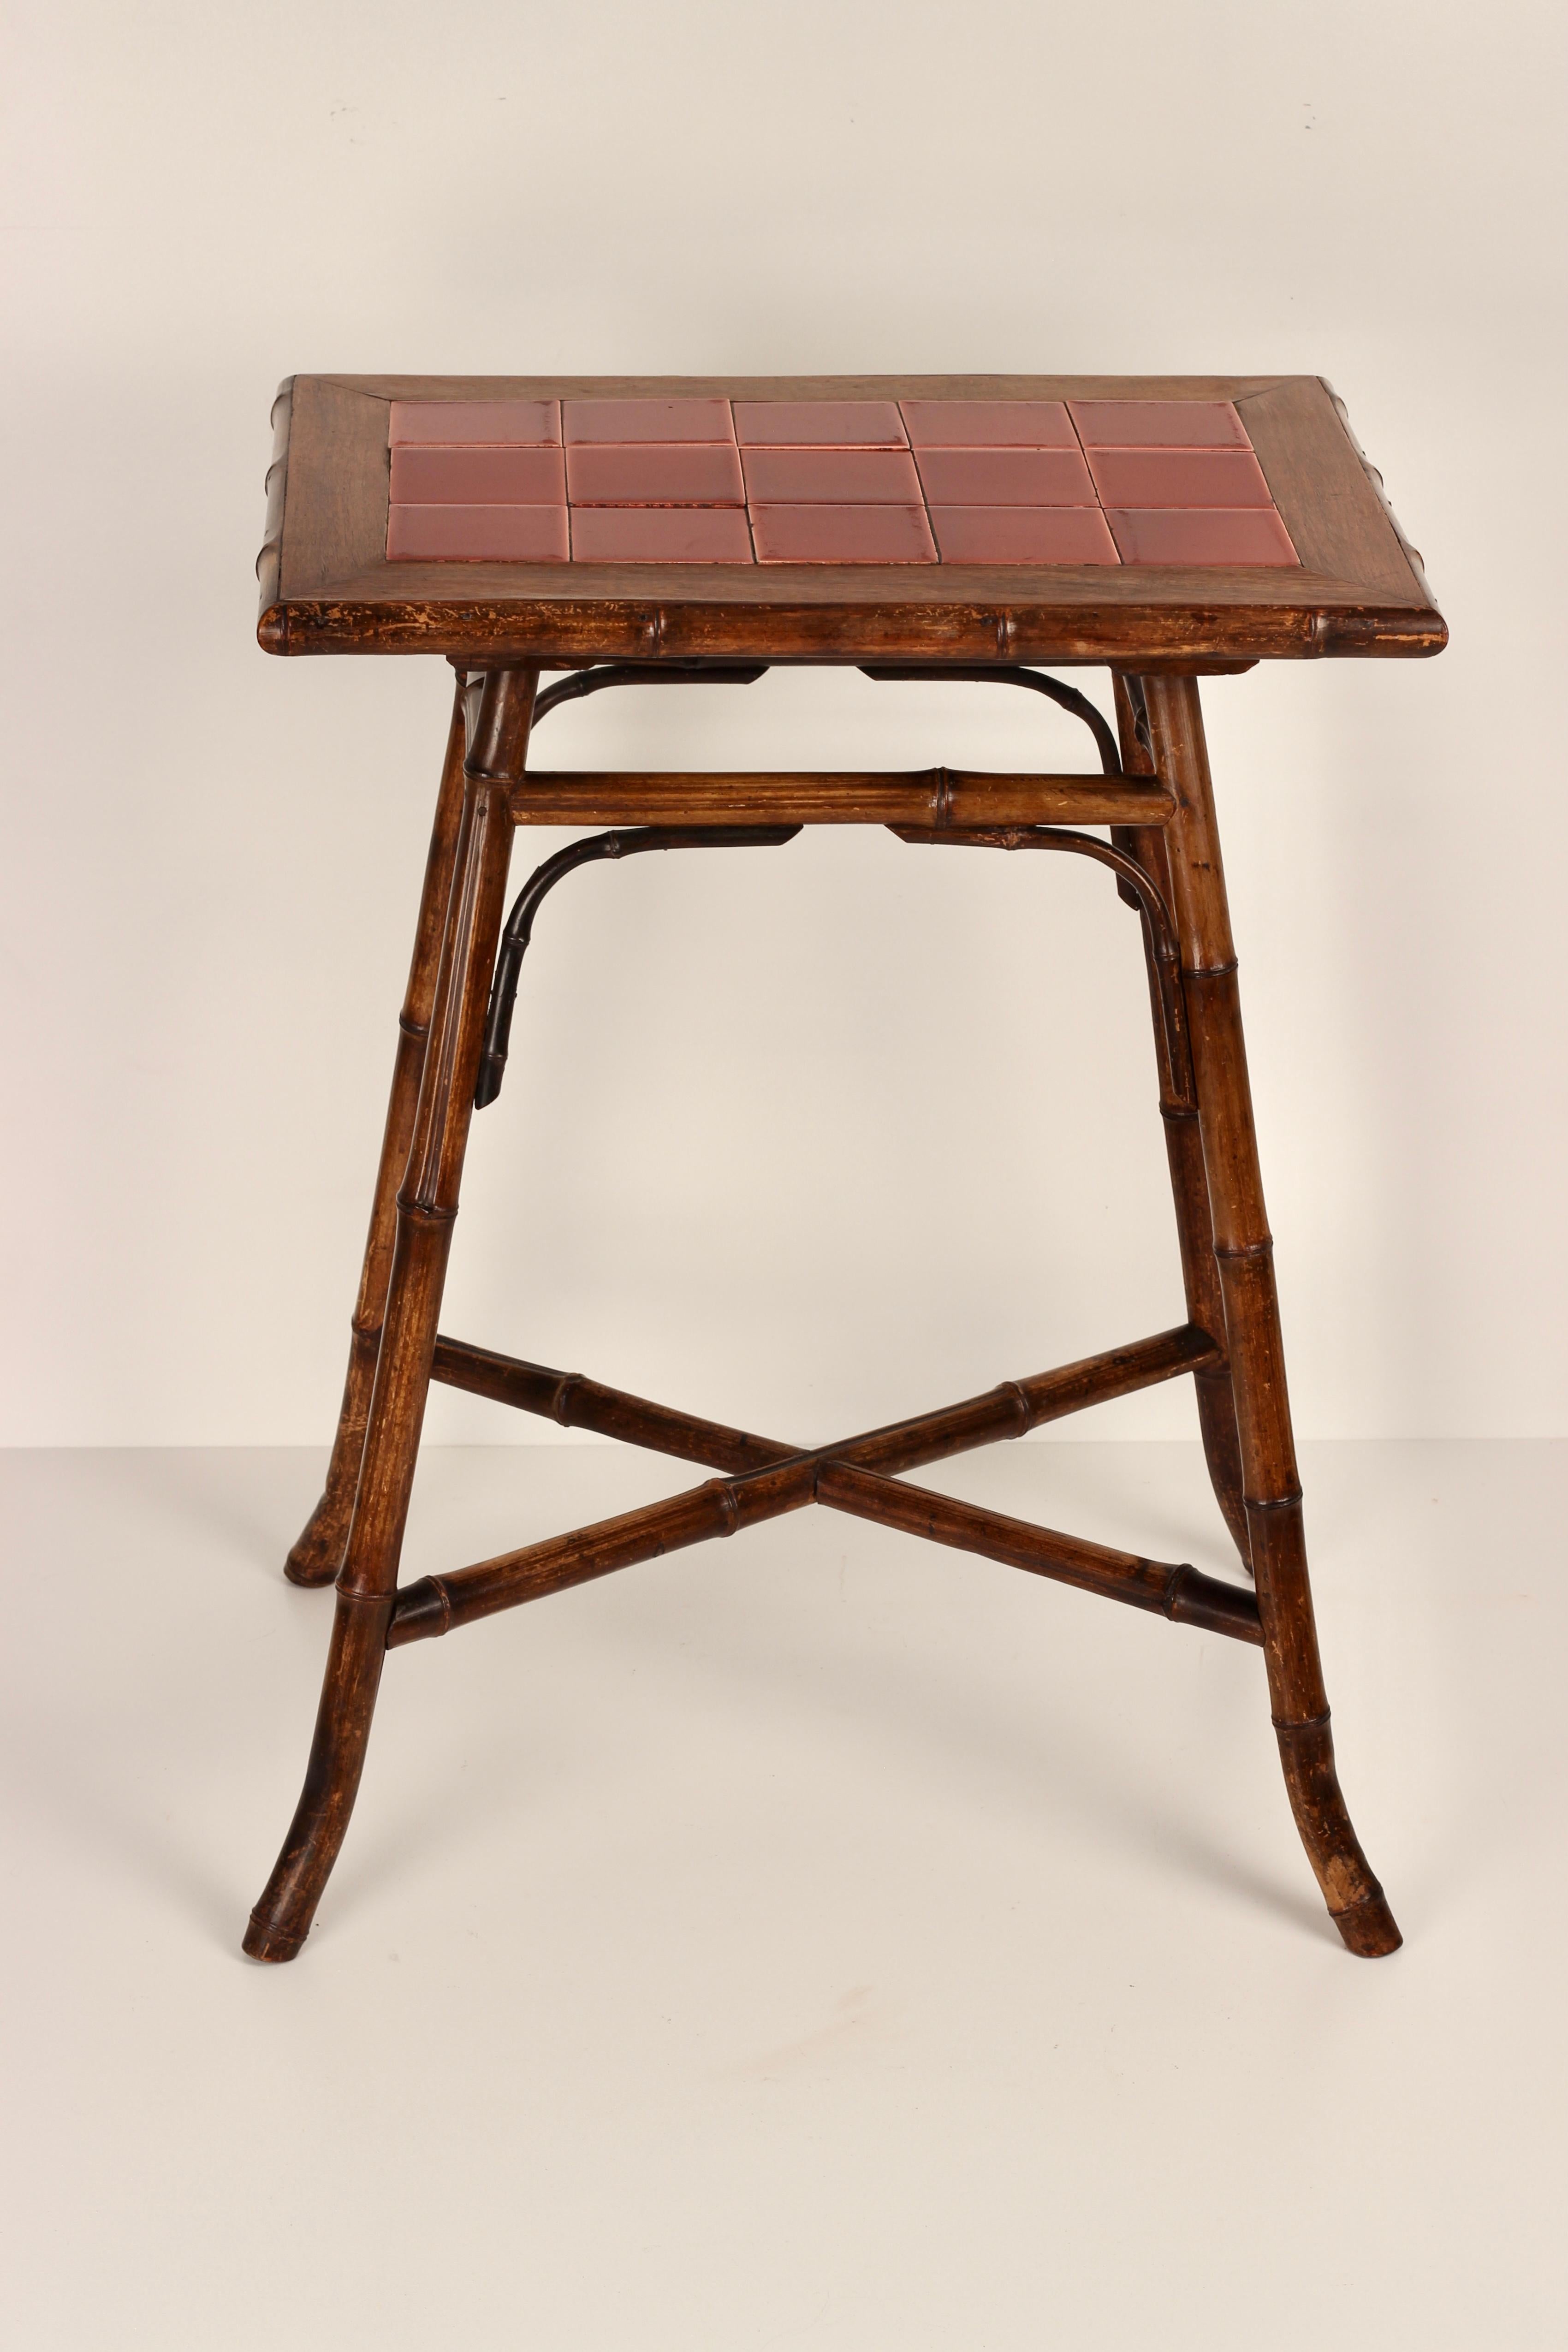 Bohemian Boho Chic Steam Bent Bamboo Side Table with Deep Red Ceramic Tiled Top 1890’s For Sale